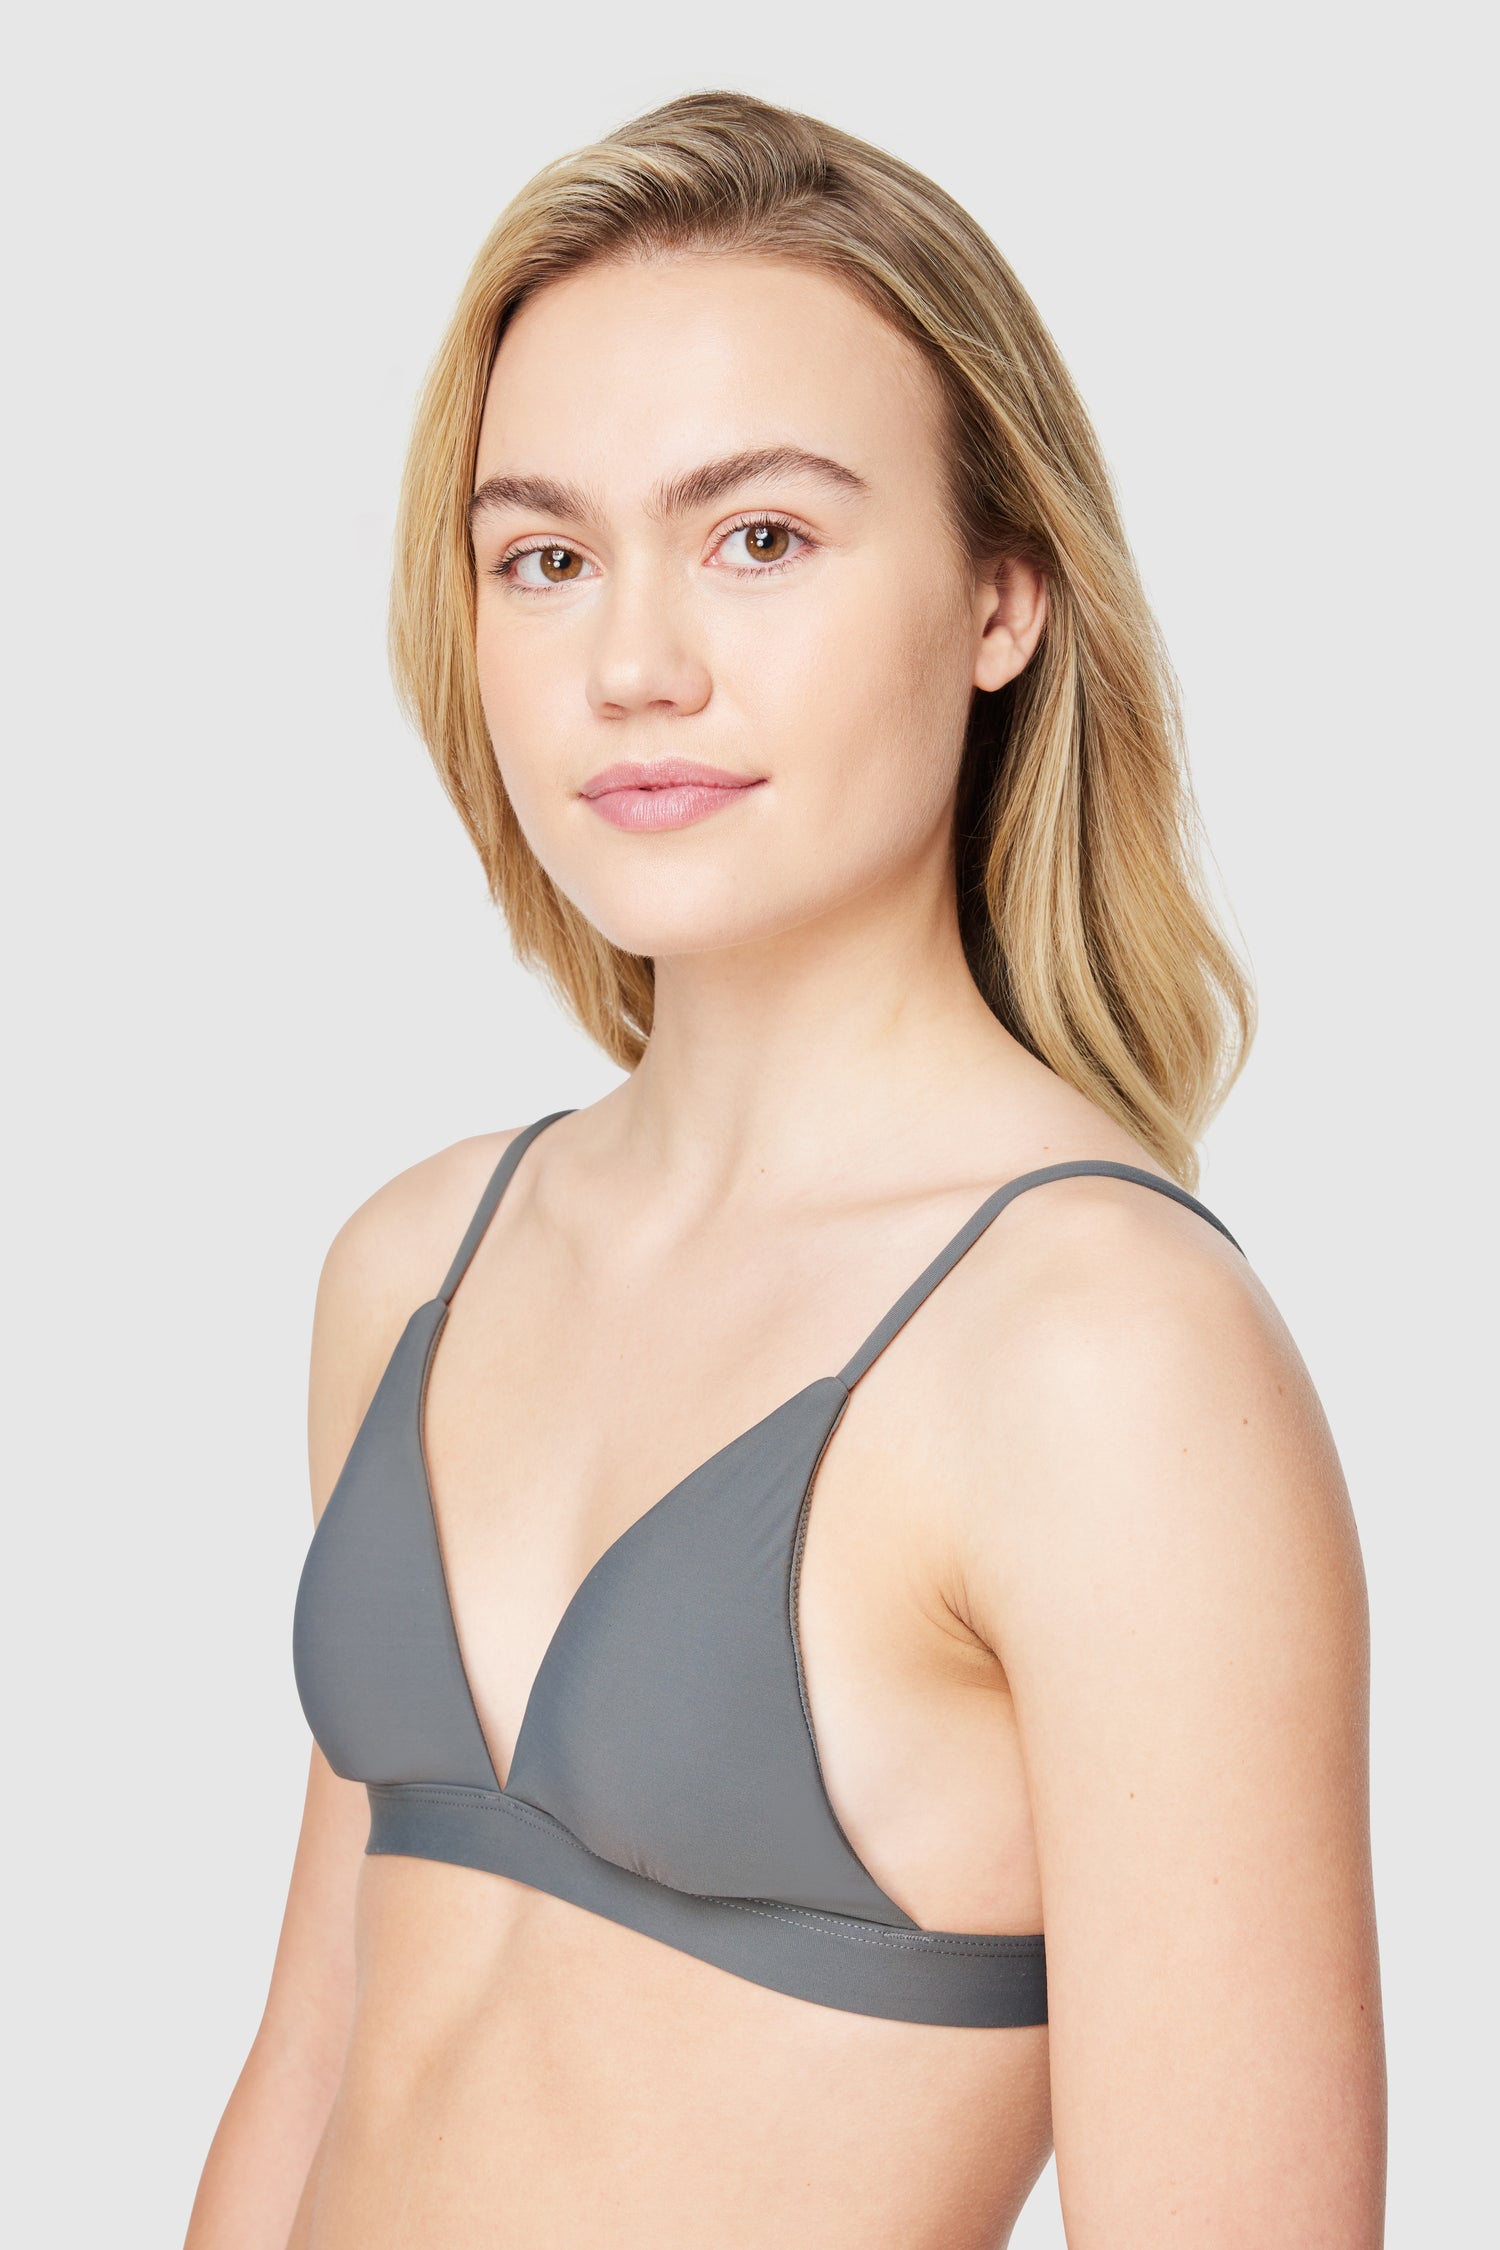 Free FWD Women's Adjustable Triangle Bralette - Comfy Chic - BEST SELLING